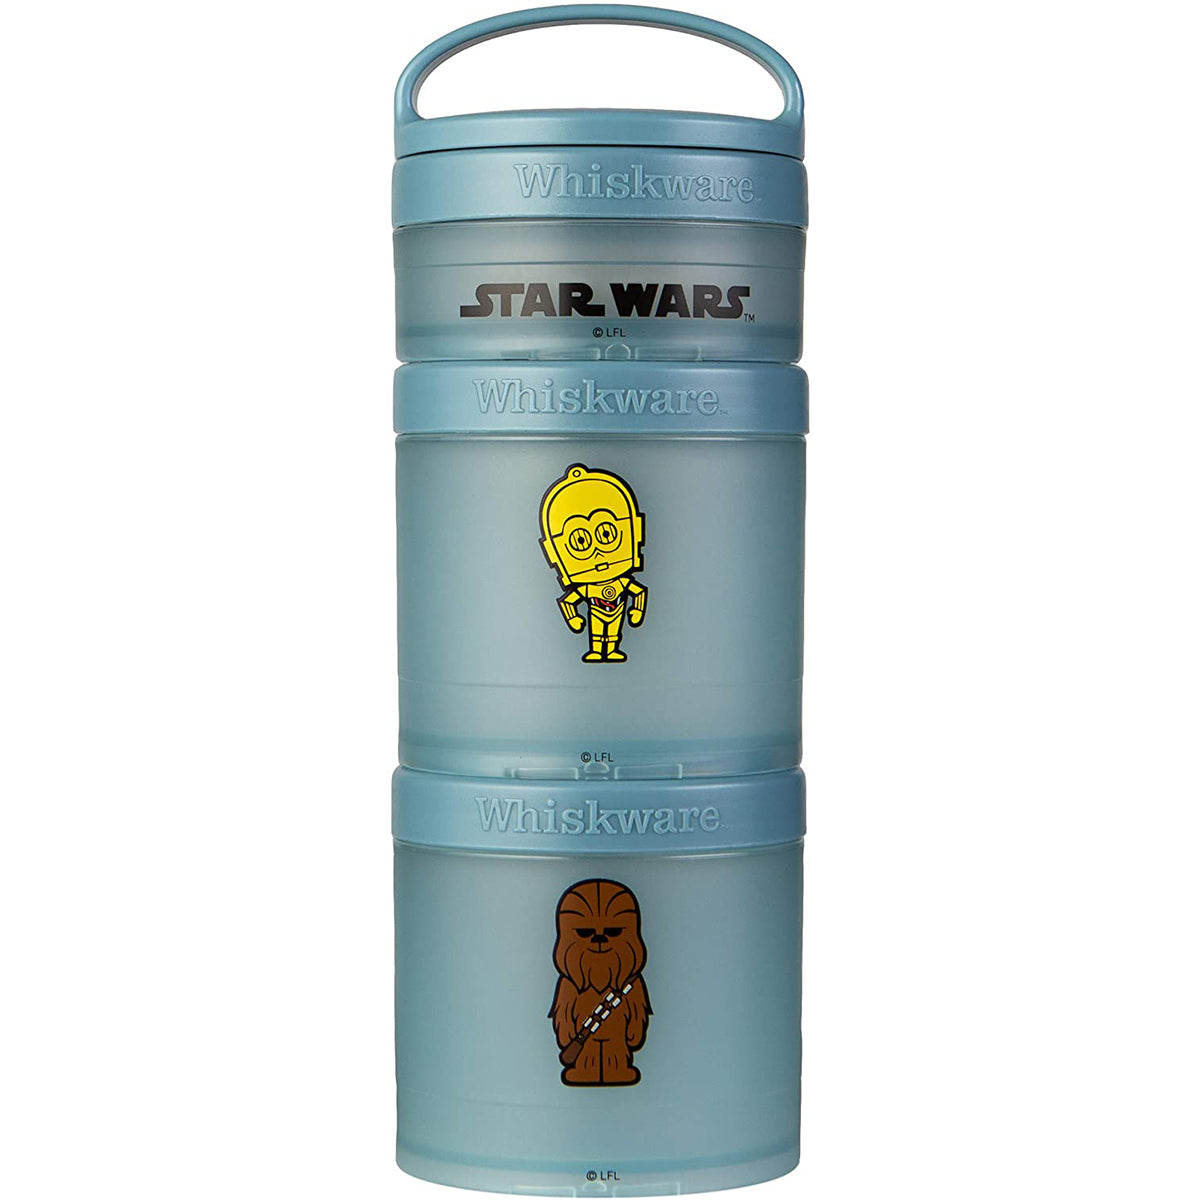 Whiskware Star Wars Stackable Snack Pack Containers - Mando